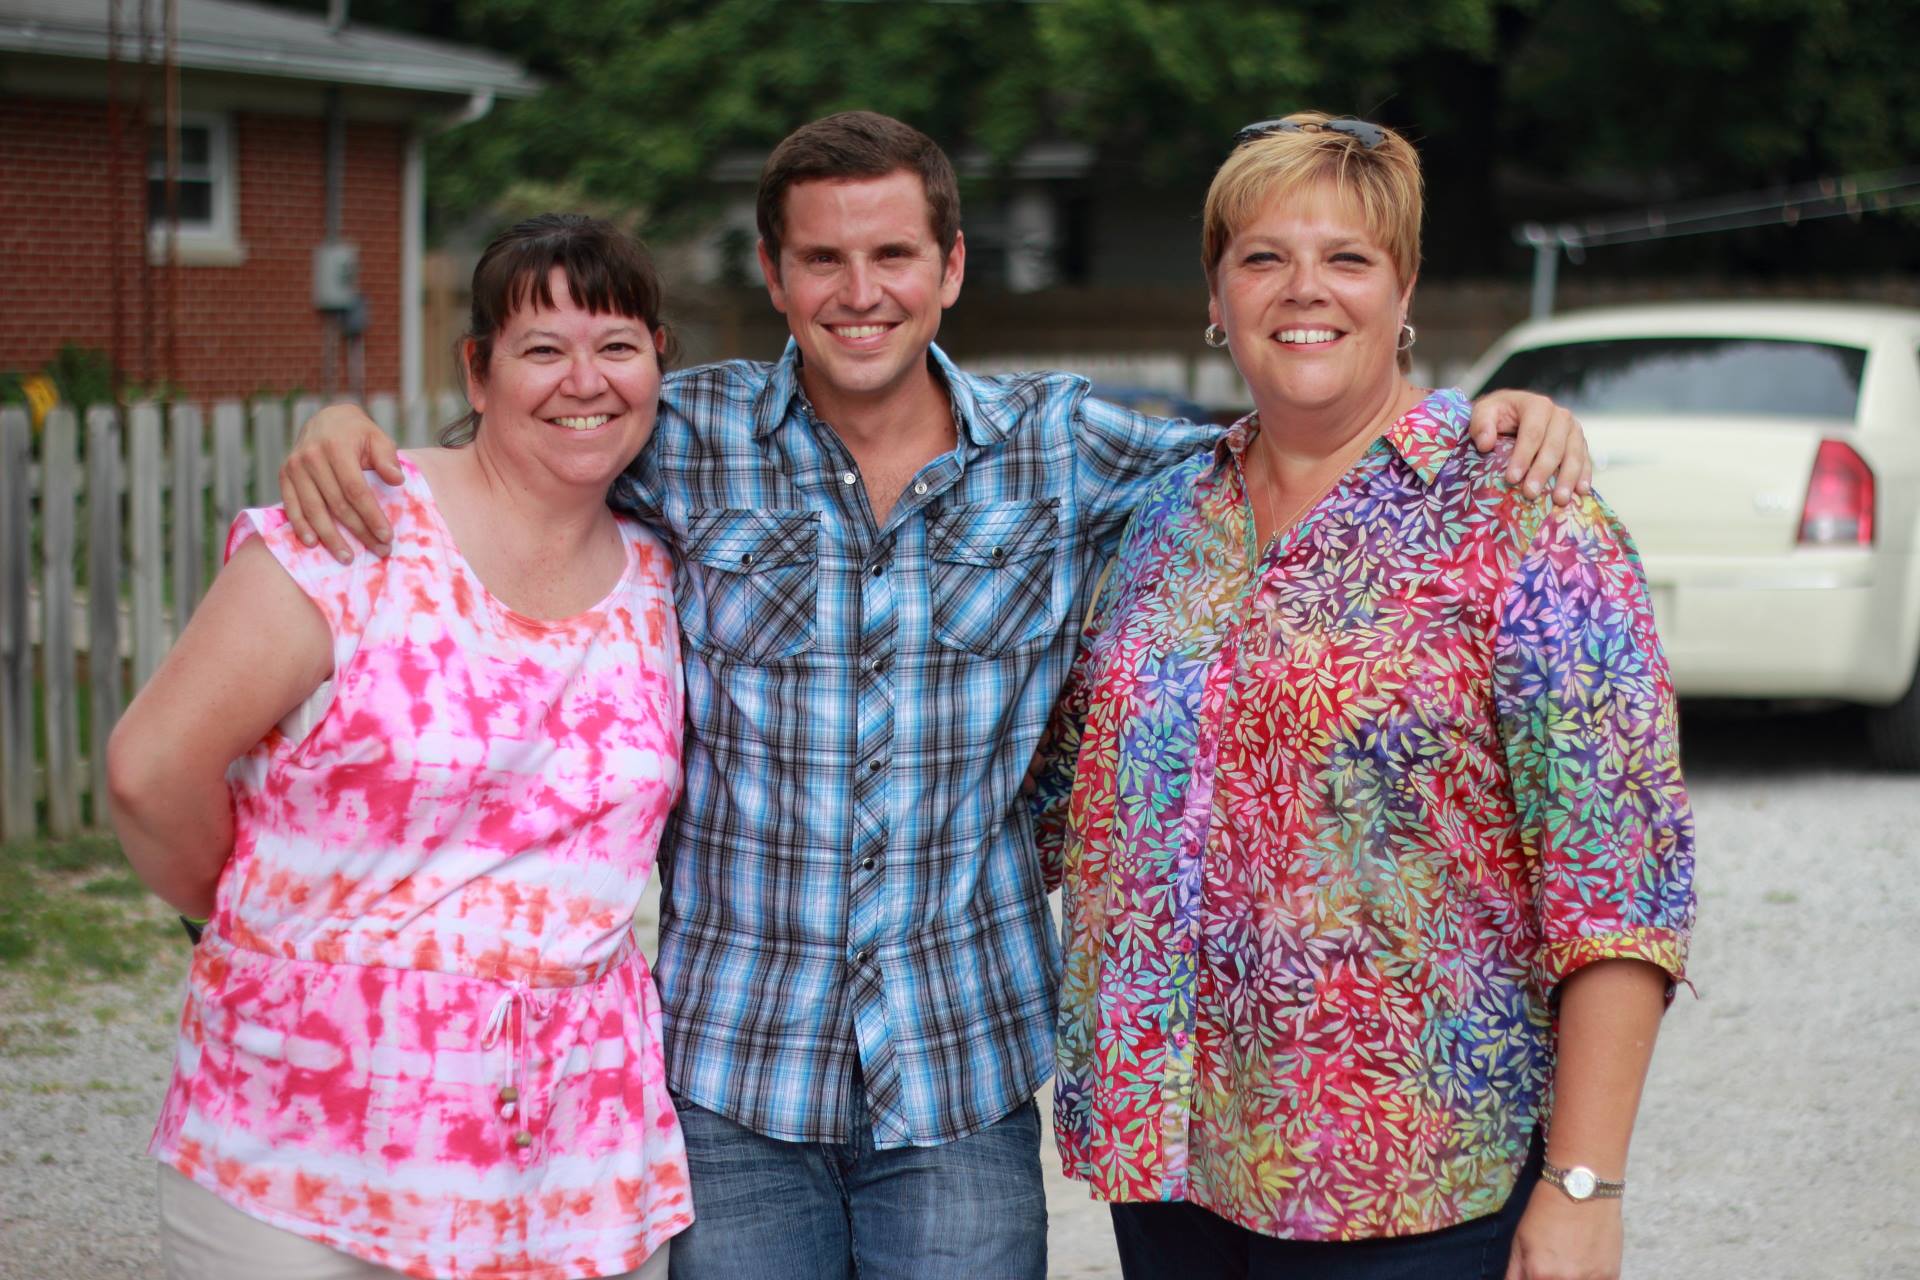 Executive Producer, Candy J. Beard with leading man, Richard (Bubba) Bryant, and Associate Producer, JoAnn Carmichael on the set of Vanished. August 2013